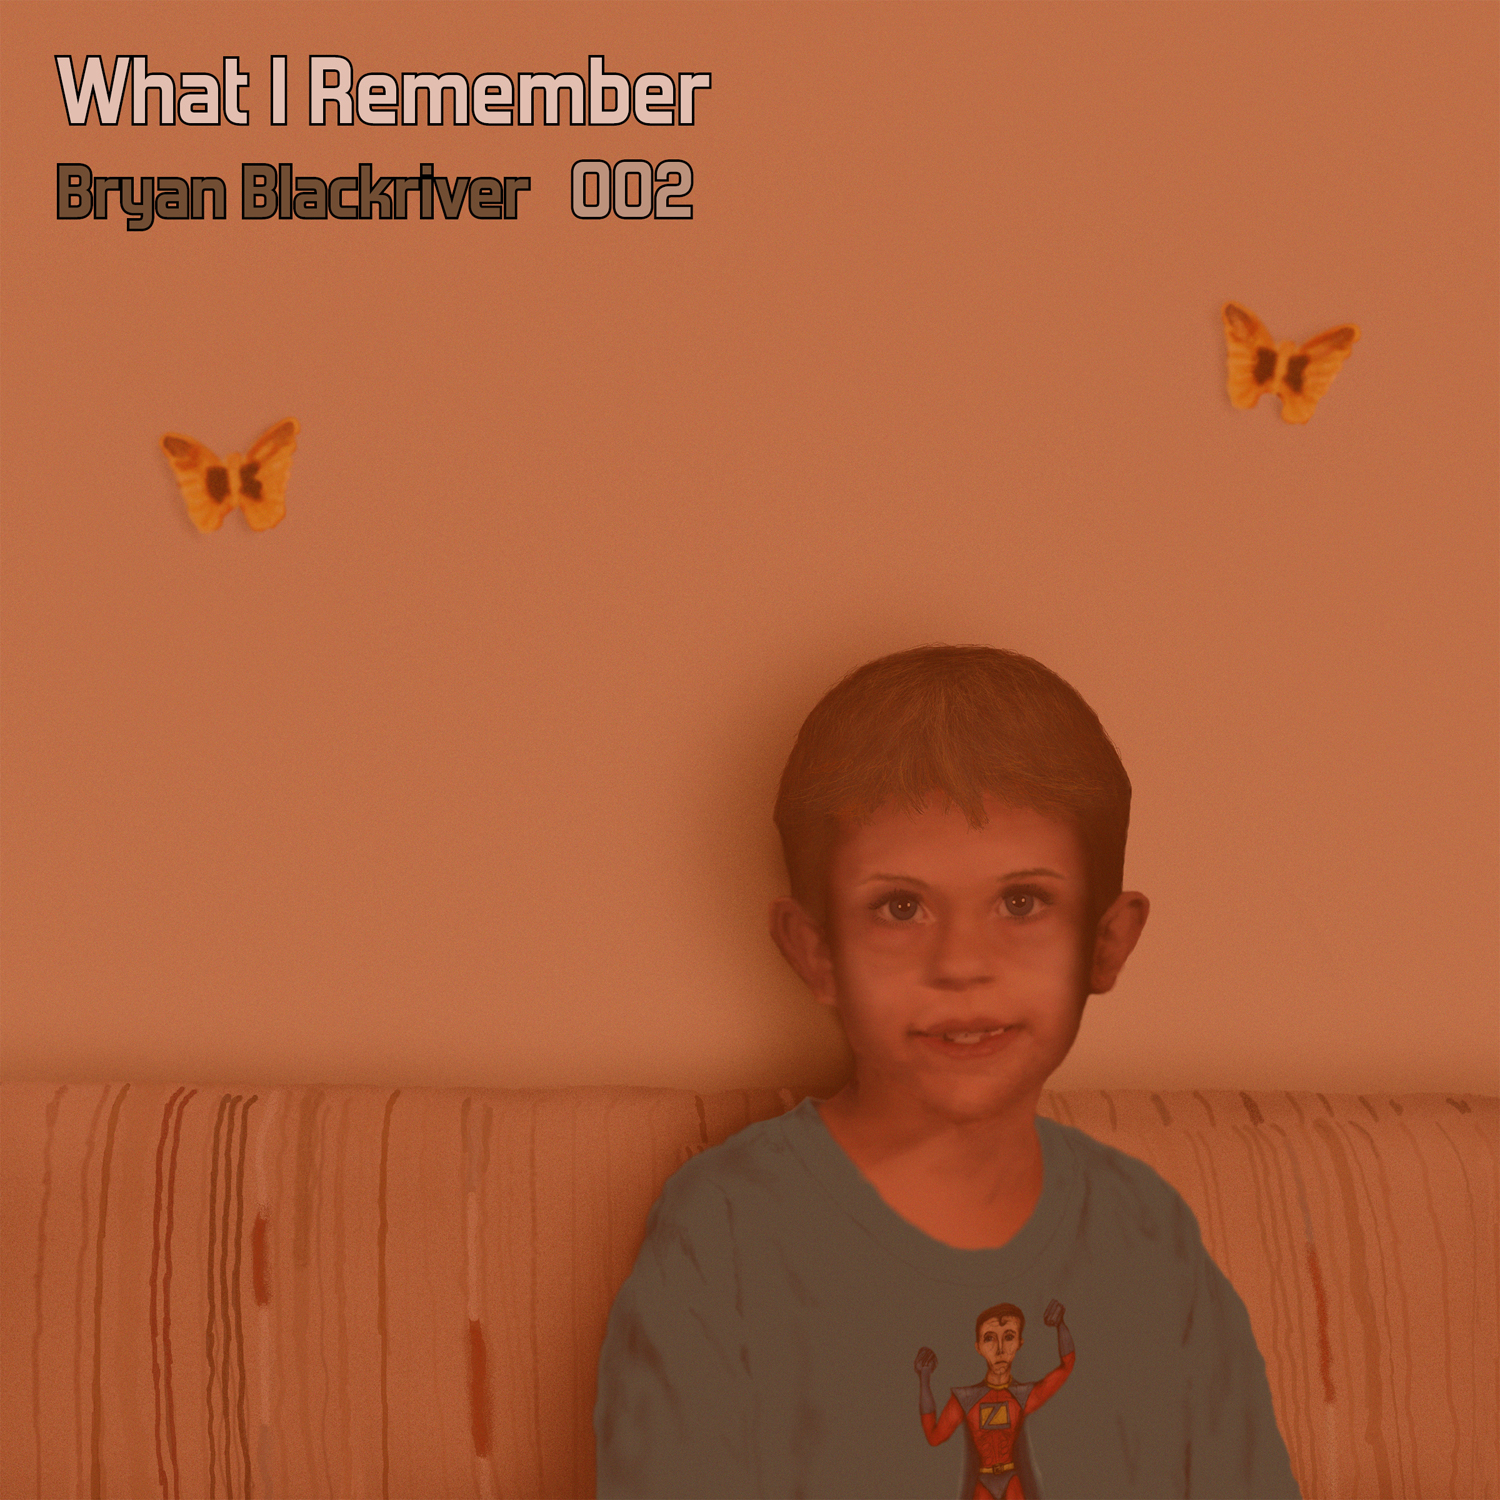 What I Remember 002